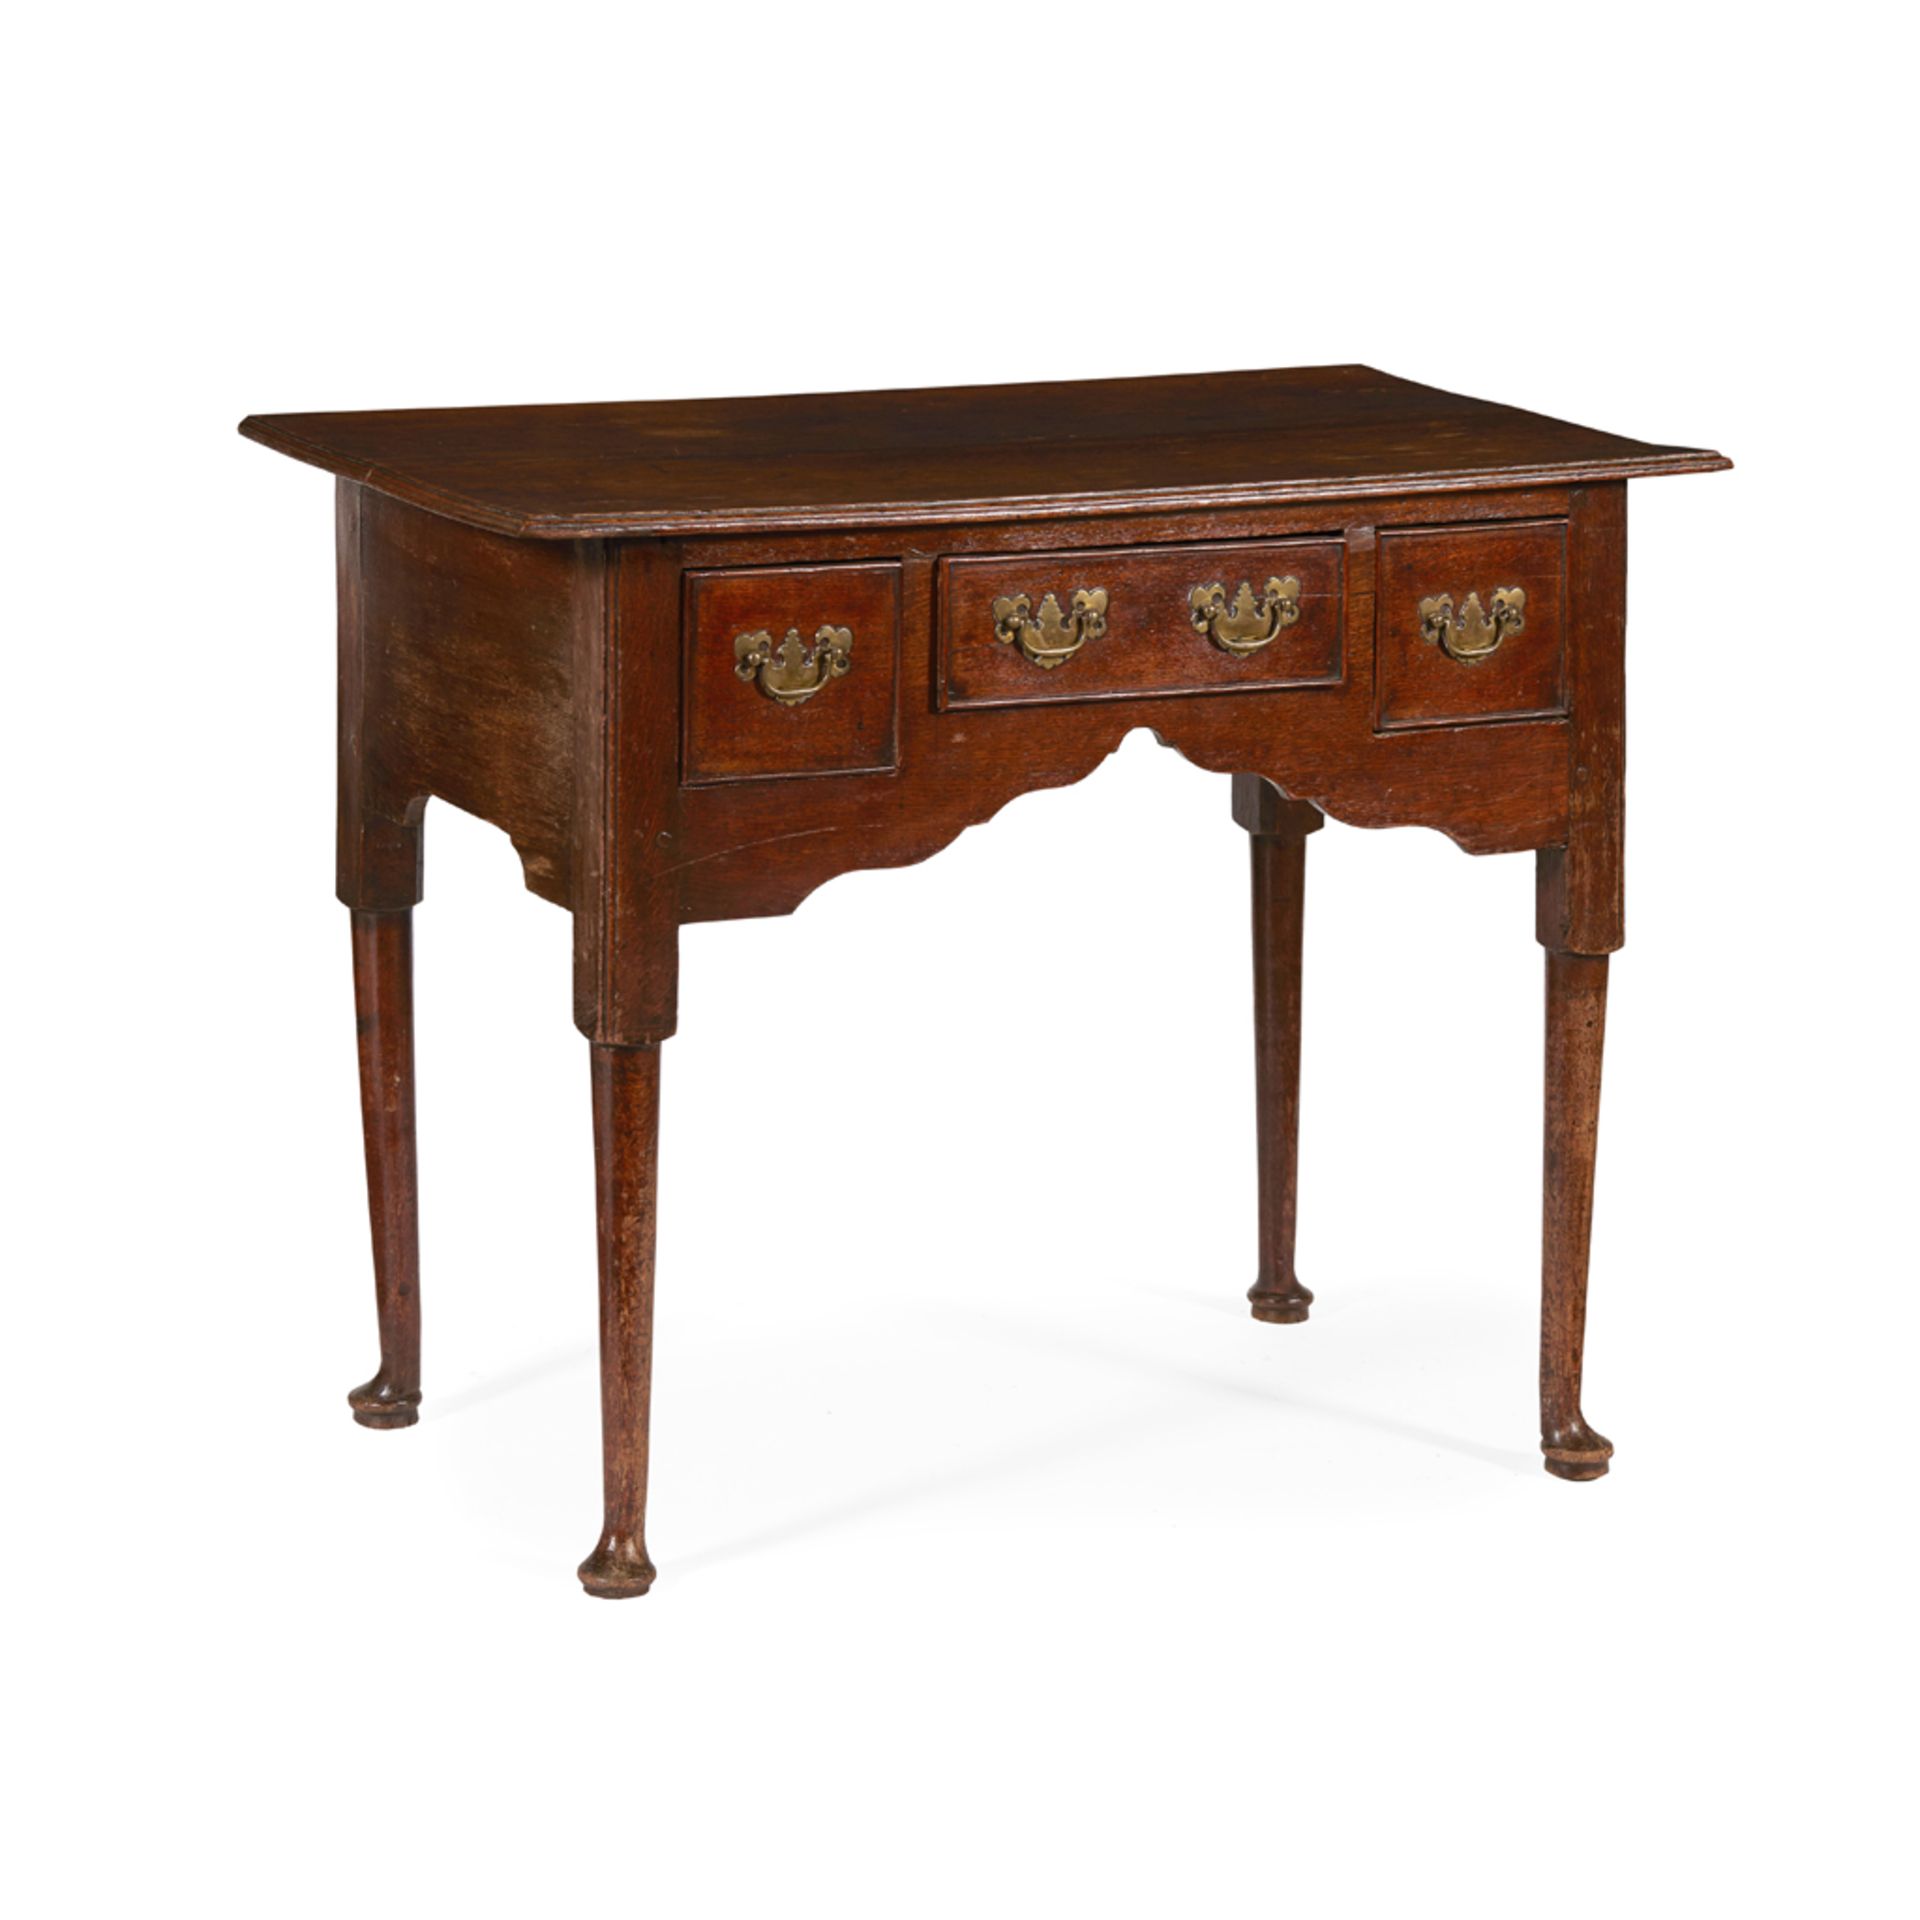 GEORGE II OAK LOWBOY MID 18TH CENTURY the top with a moulded edge above three frieze drawers and a